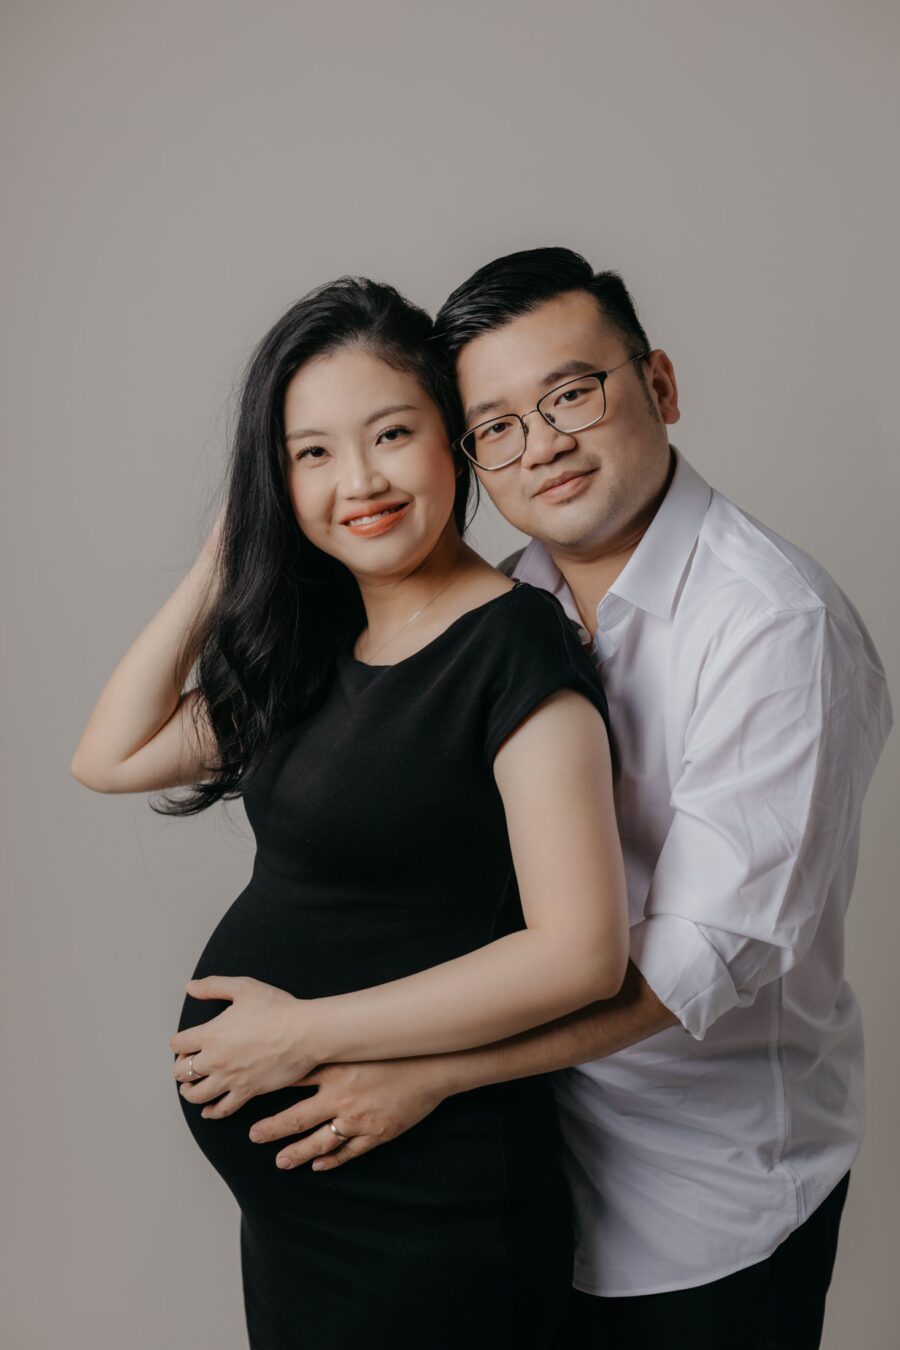 Expectant parents embracing during mini maternity session at Darkroom Project Studio